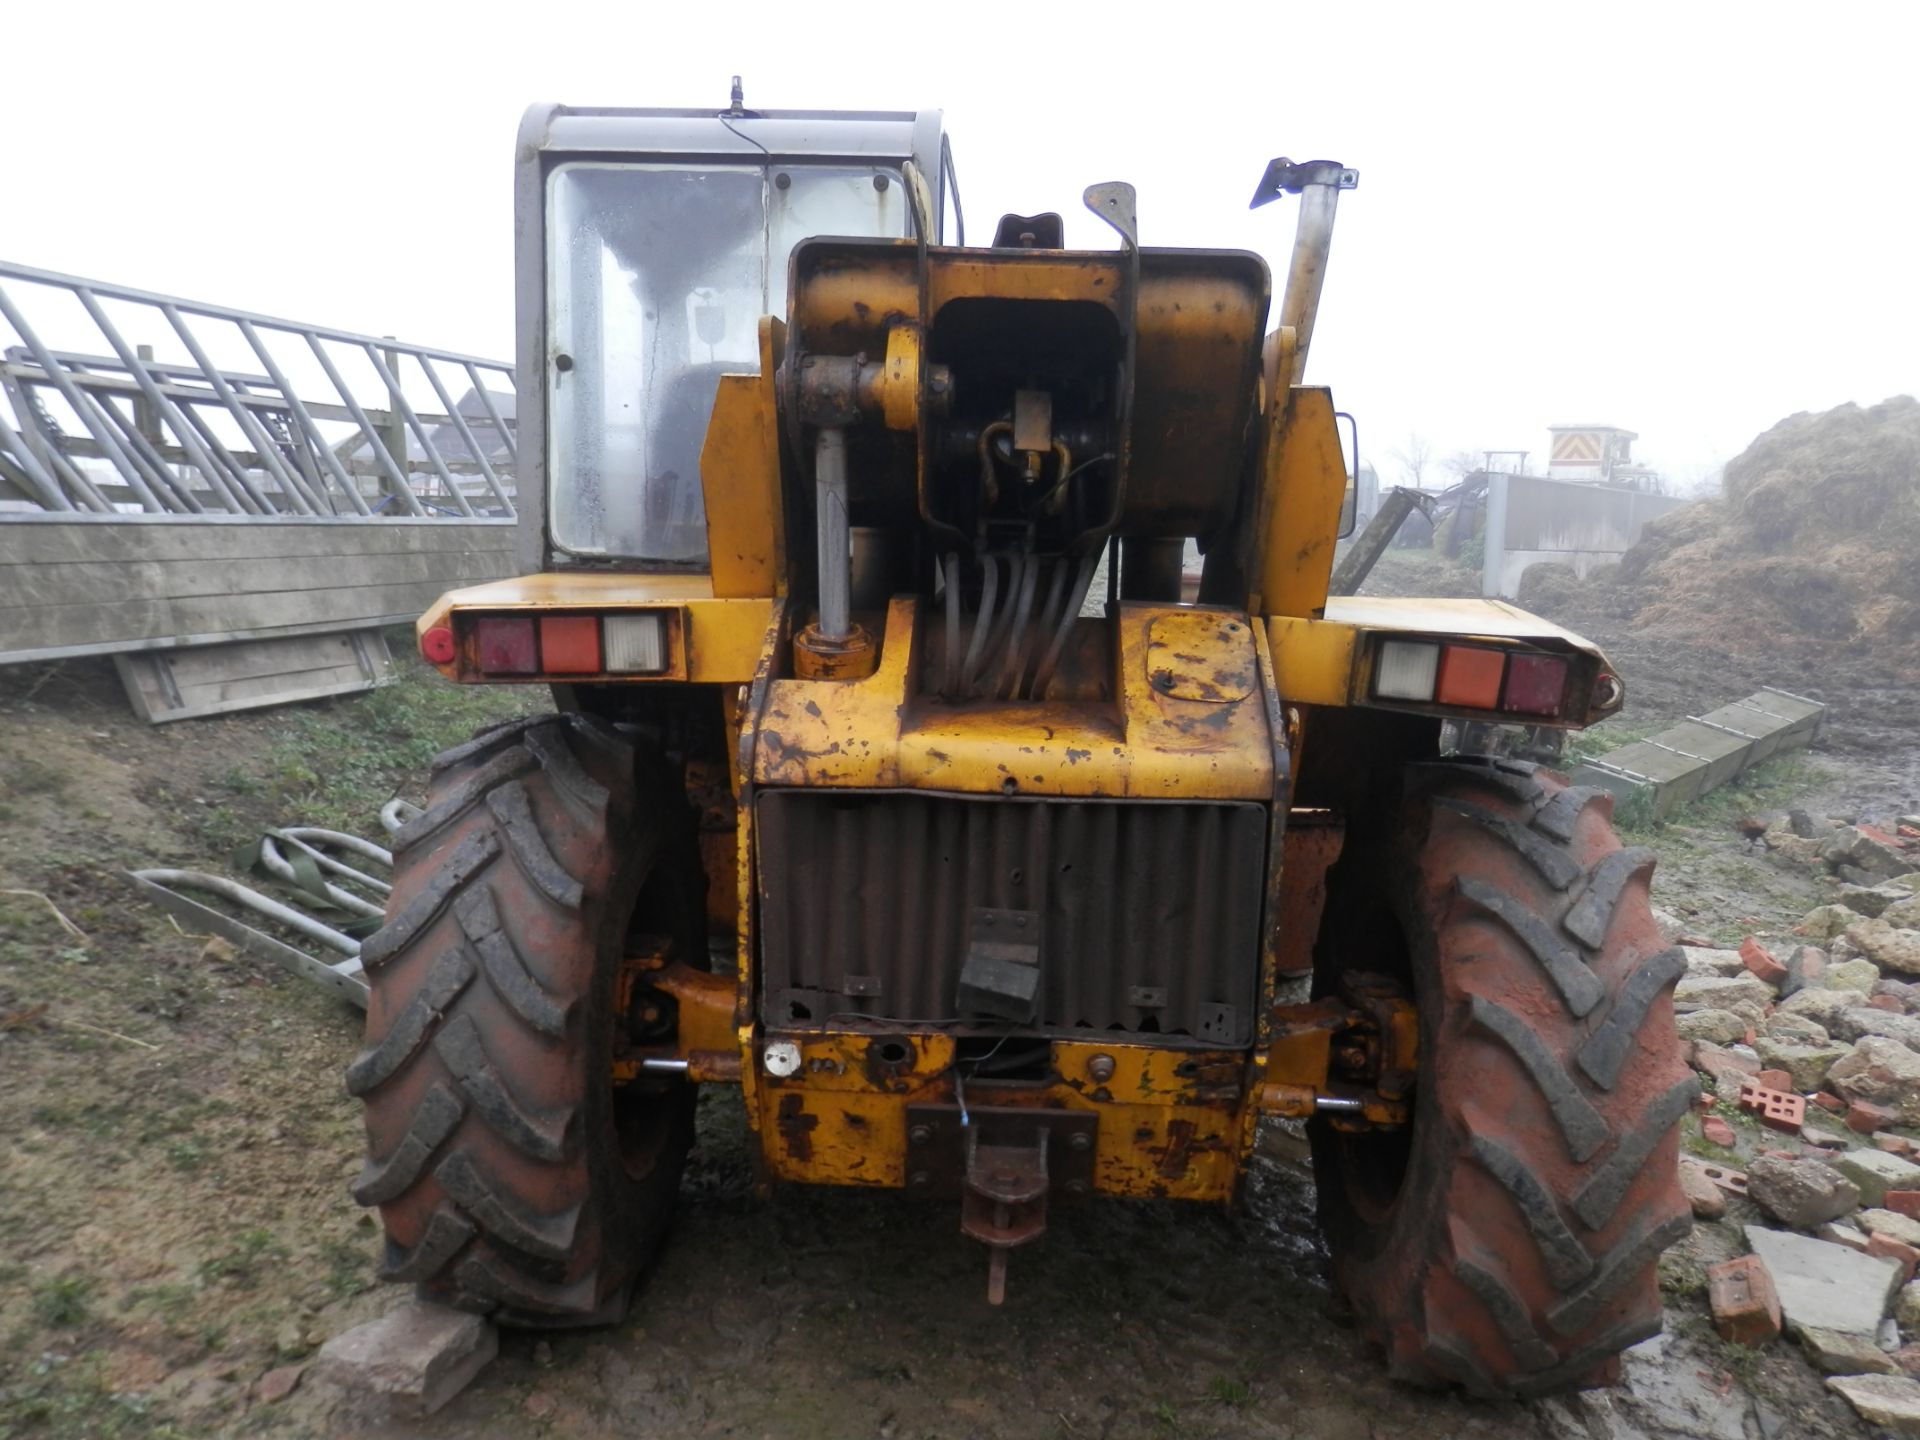 1994 JCB 525-58 LOAD ALL FARM SPECIAL TELE HANDLER. WORKING UNIT - Image 2 of 9